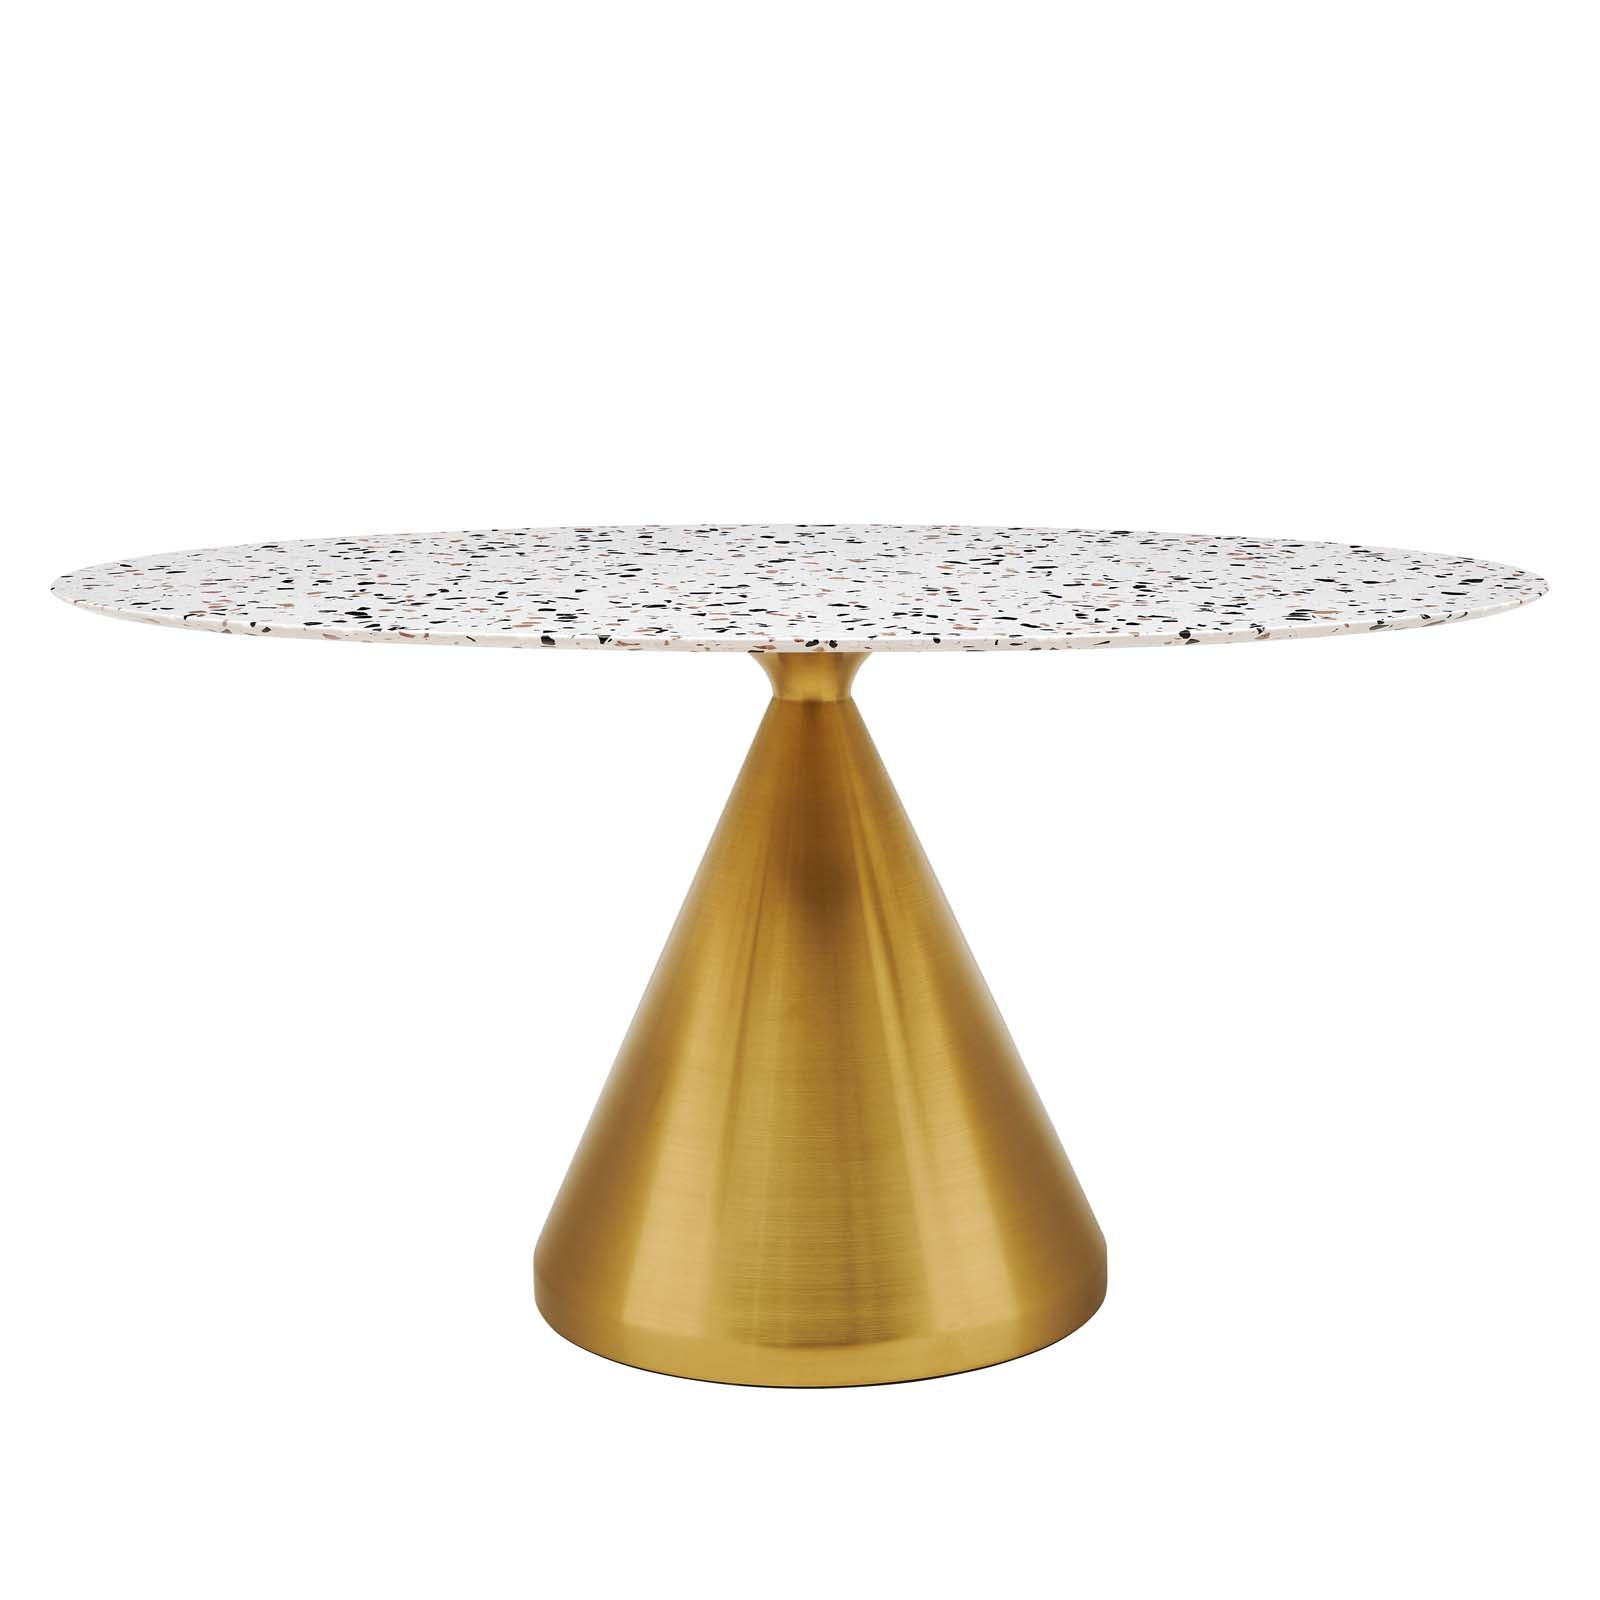 Tupelo 60" Oval Terrazzo Dining Table - East Shore Modern Home Furnishings